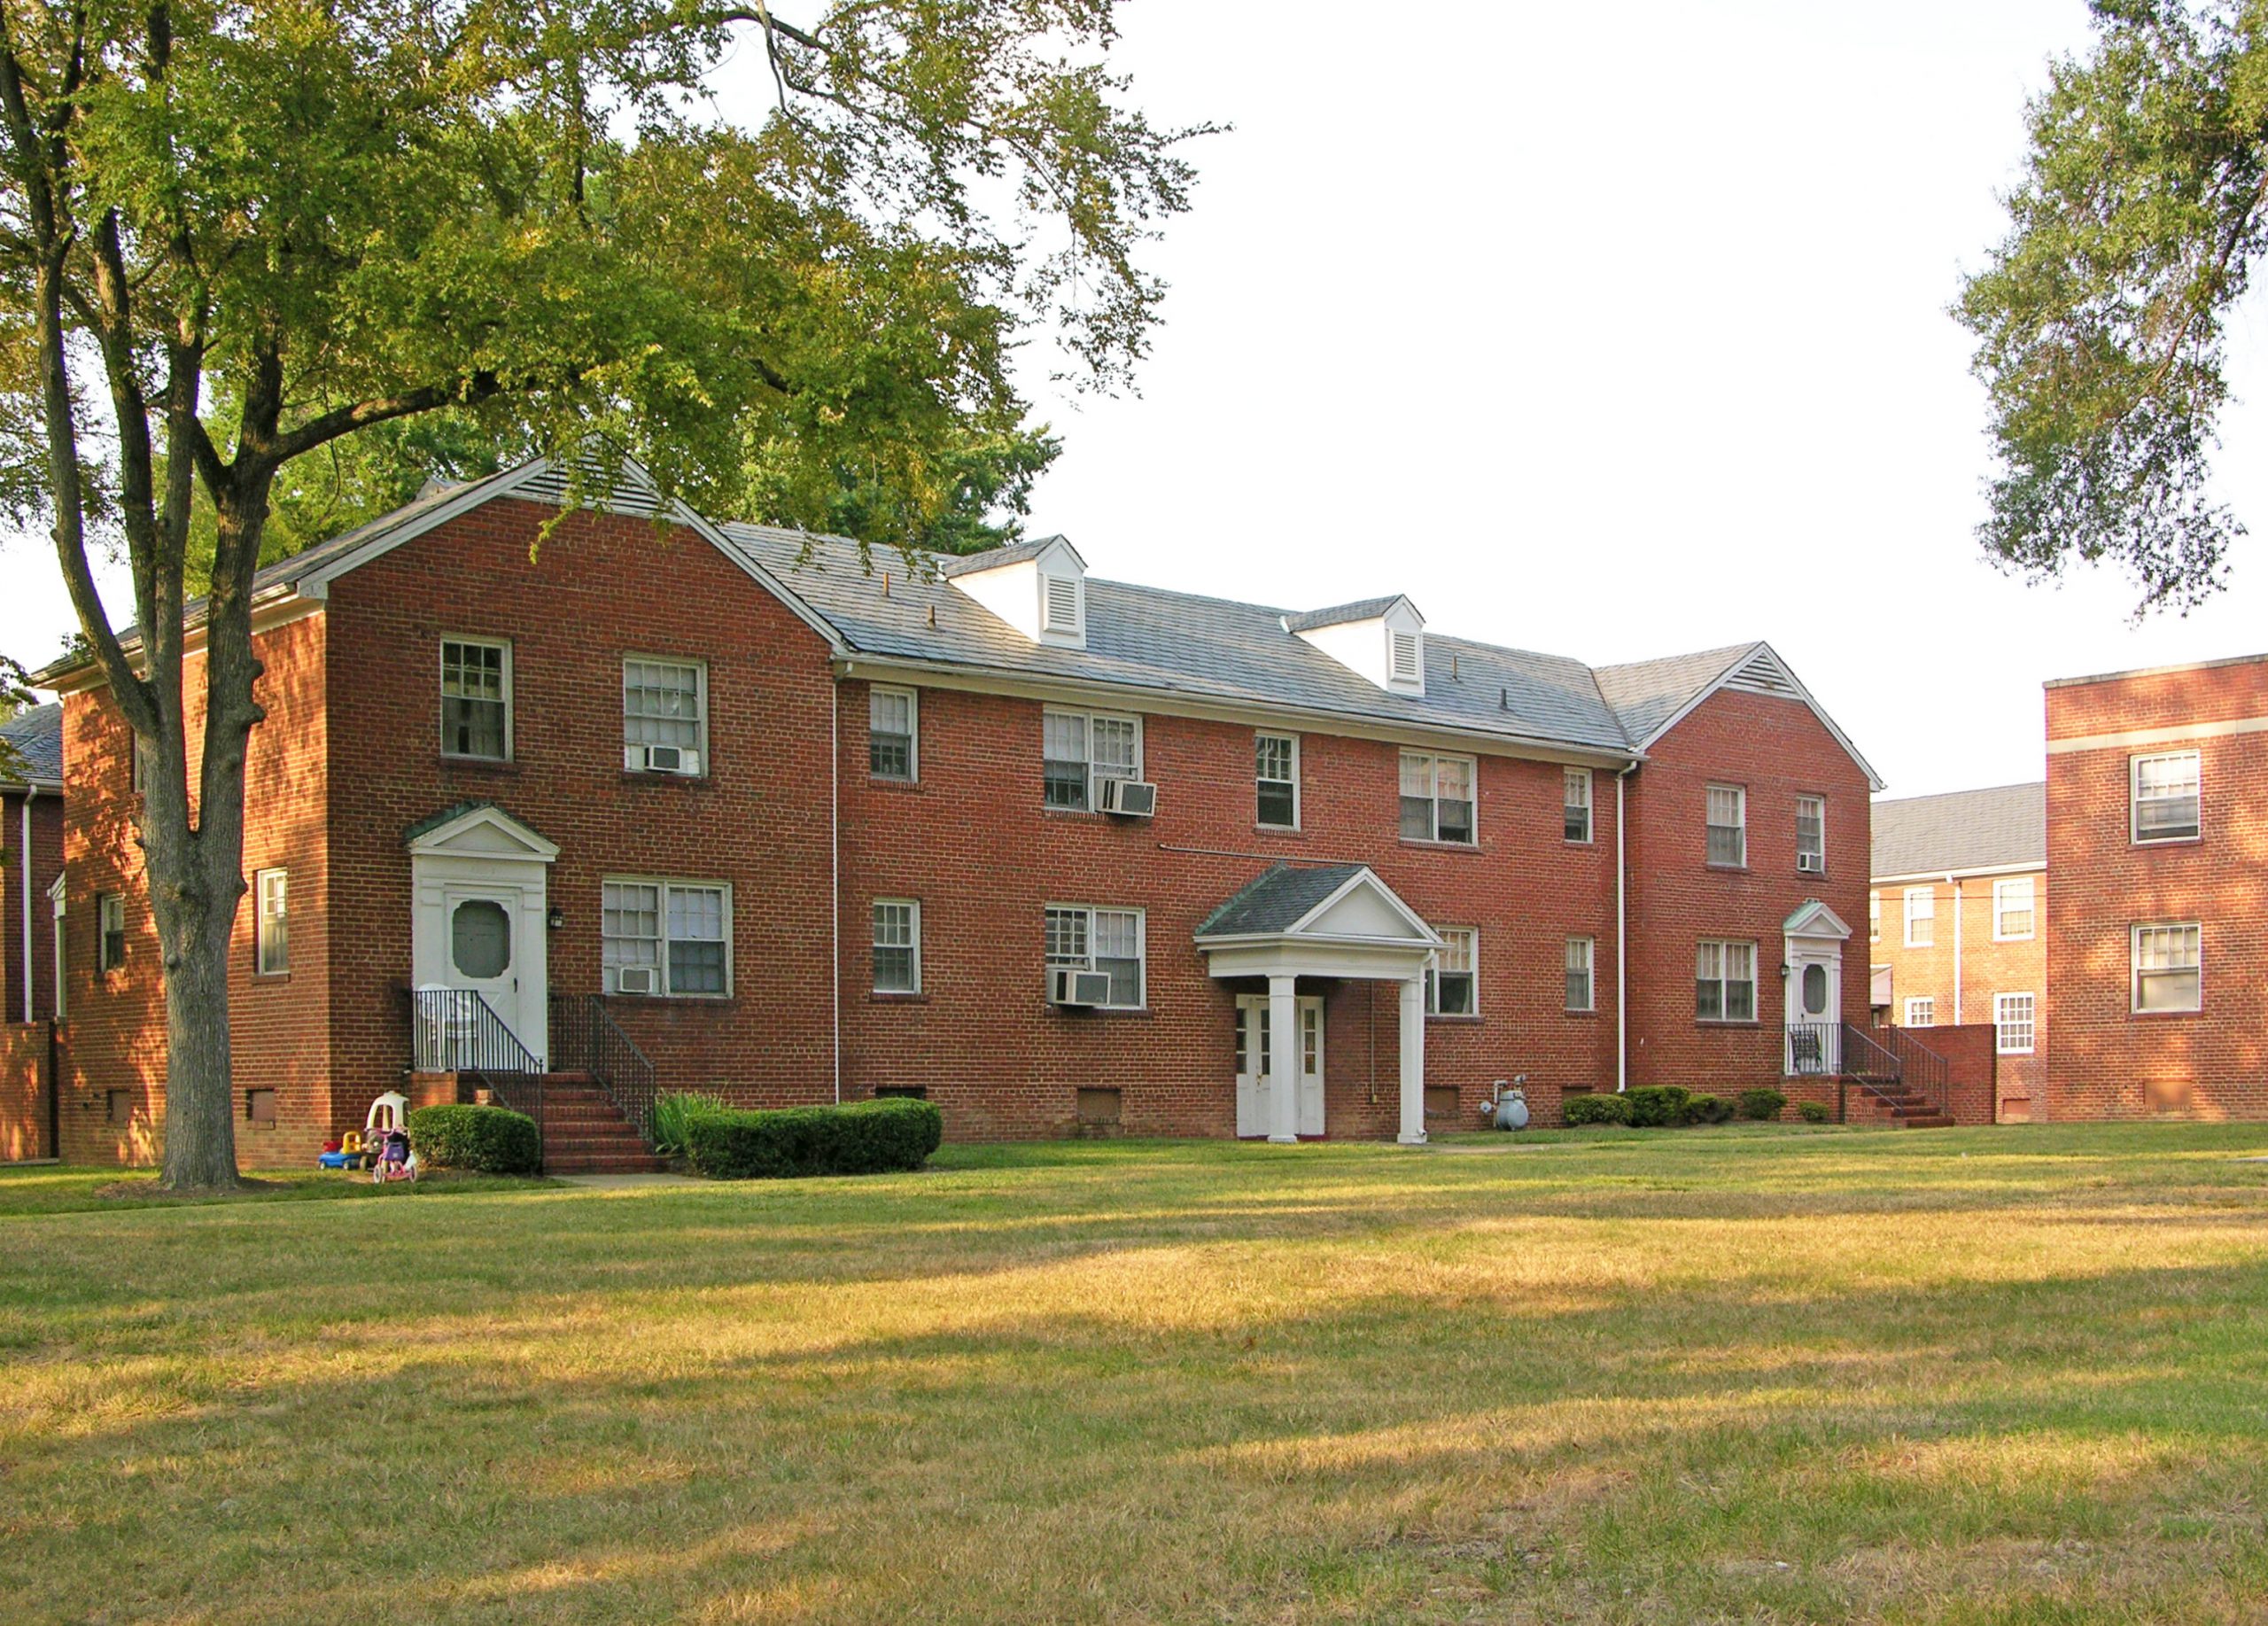 127-6191_FHA_GardenApts_MPD_Wicker_Apts_2006_ext_front_facade_scaled_VLR_Online-scaled